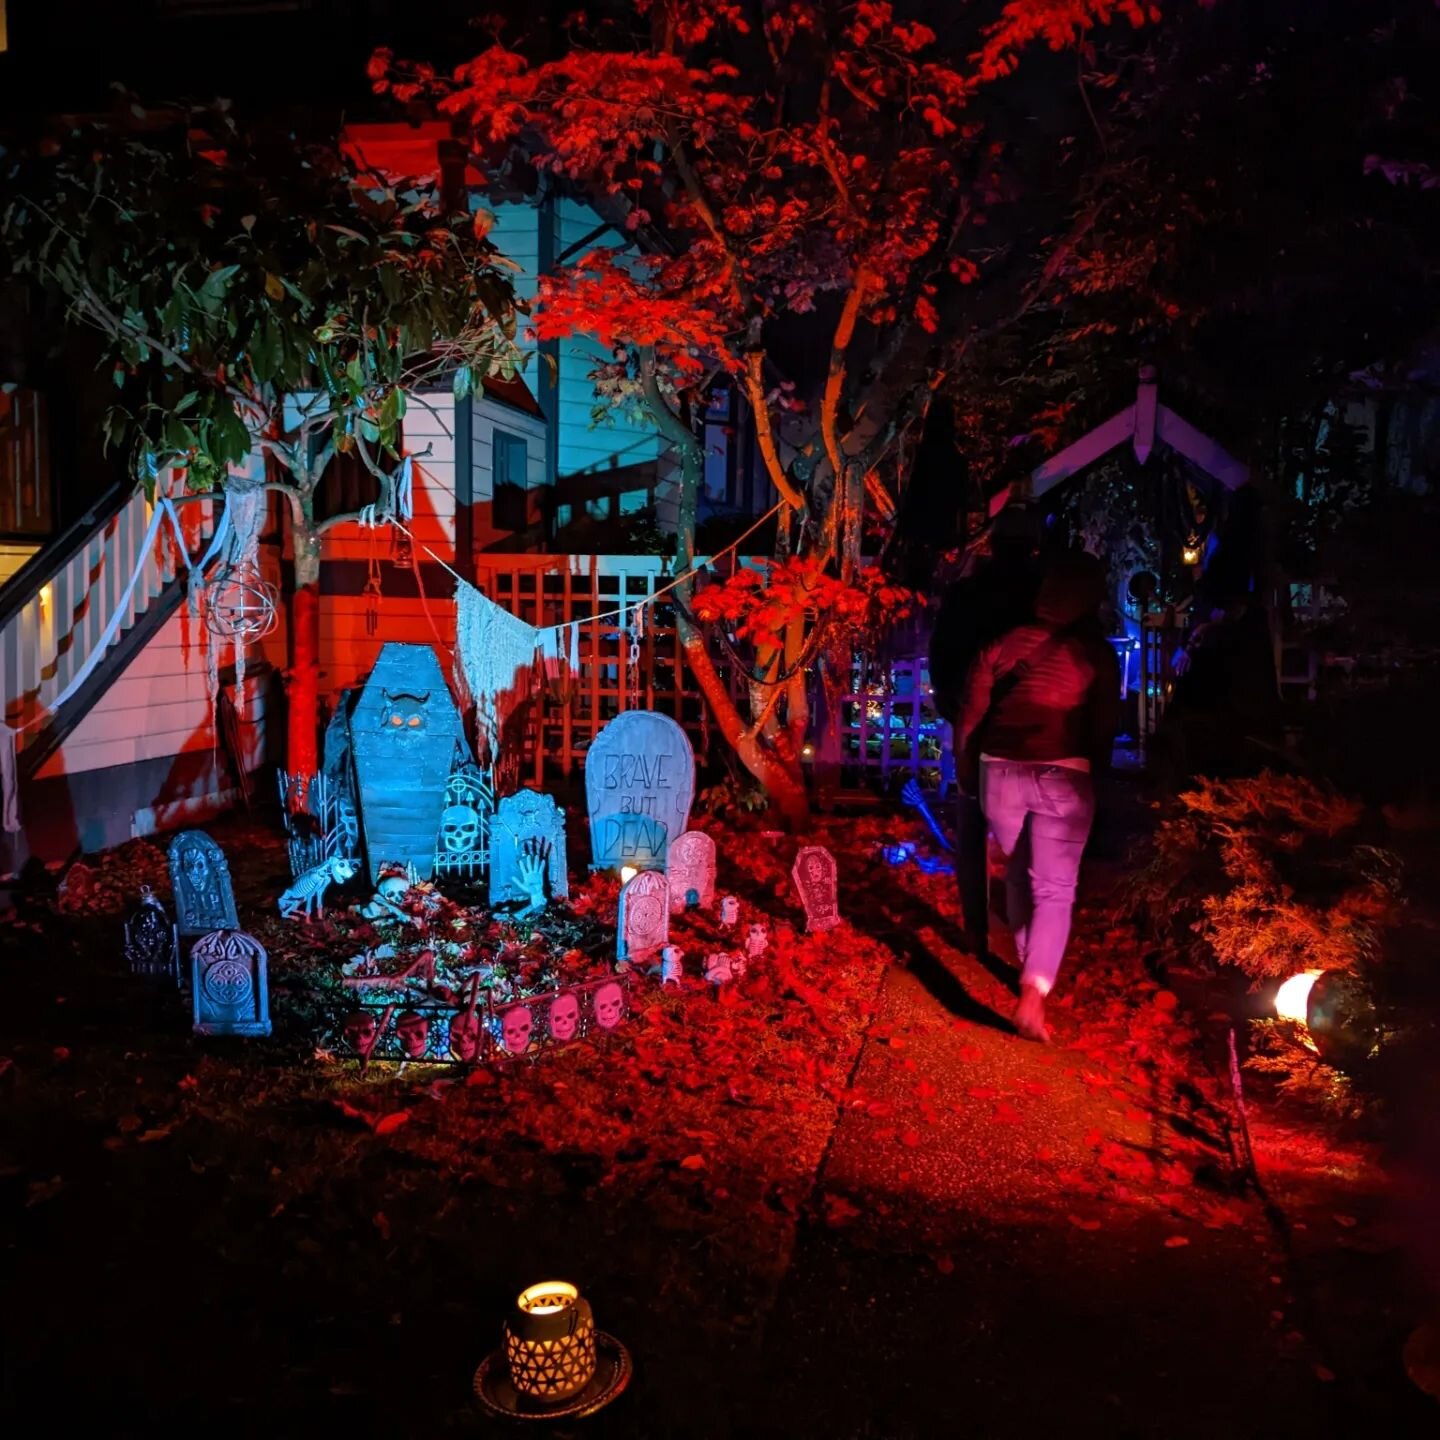 Had an epic Halloween! An atmospheric walk through the Wizard's daughter's misadventure. Thank you family and friends for making the experience smooth, easy and fun! The neighborhood really buzzed around the house.